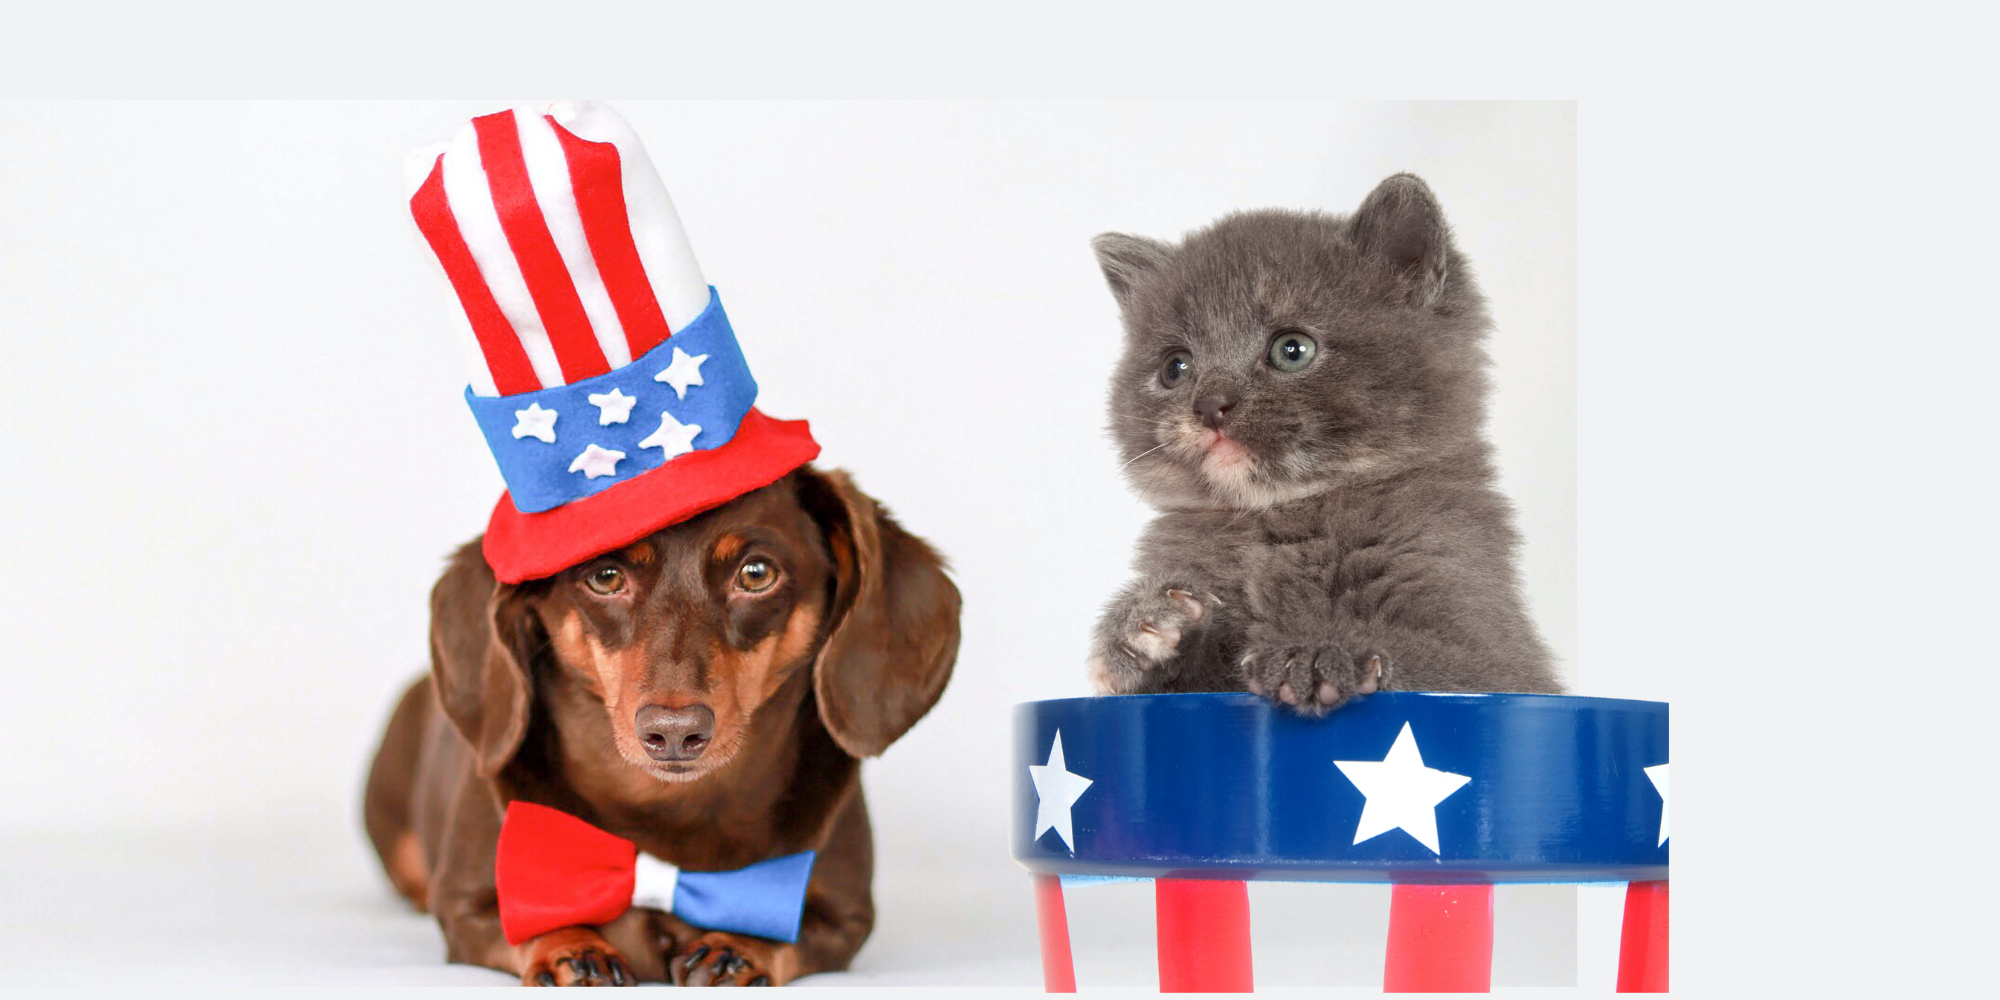 Dog and cat wearing festive costumes Click to view article, Animal Services Division Offers Tips  to Keep Pets Safe During July 4 Holiday